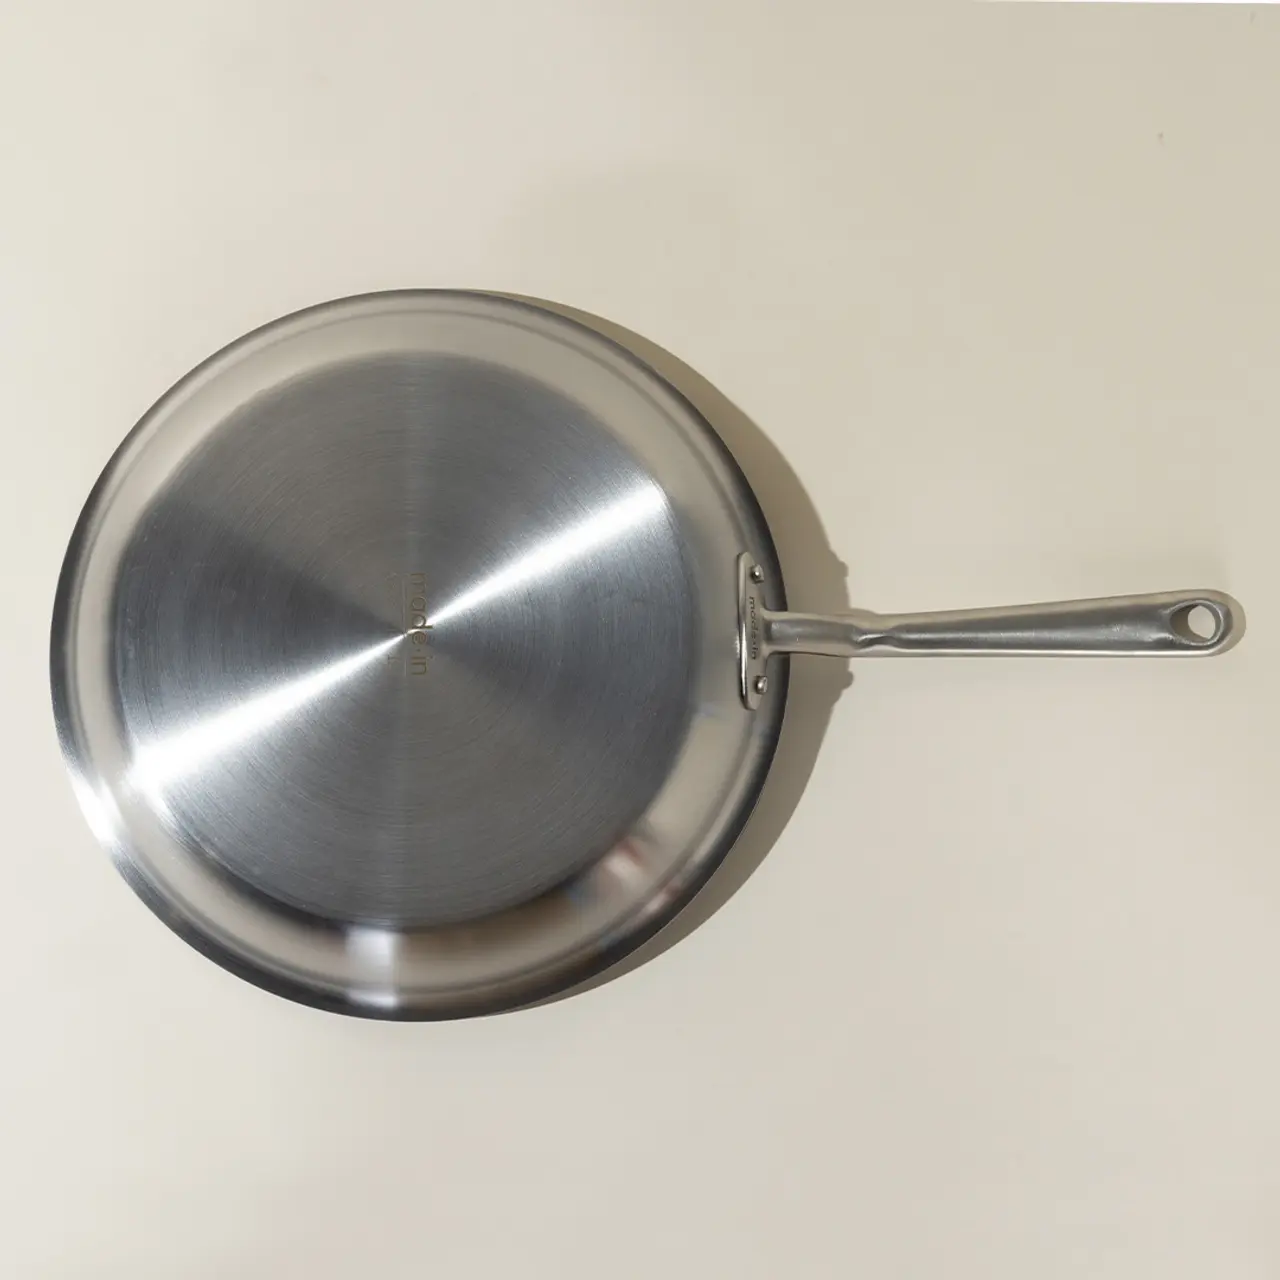 A stainless steel frying pan with a long handle is shown from above on a plain background.